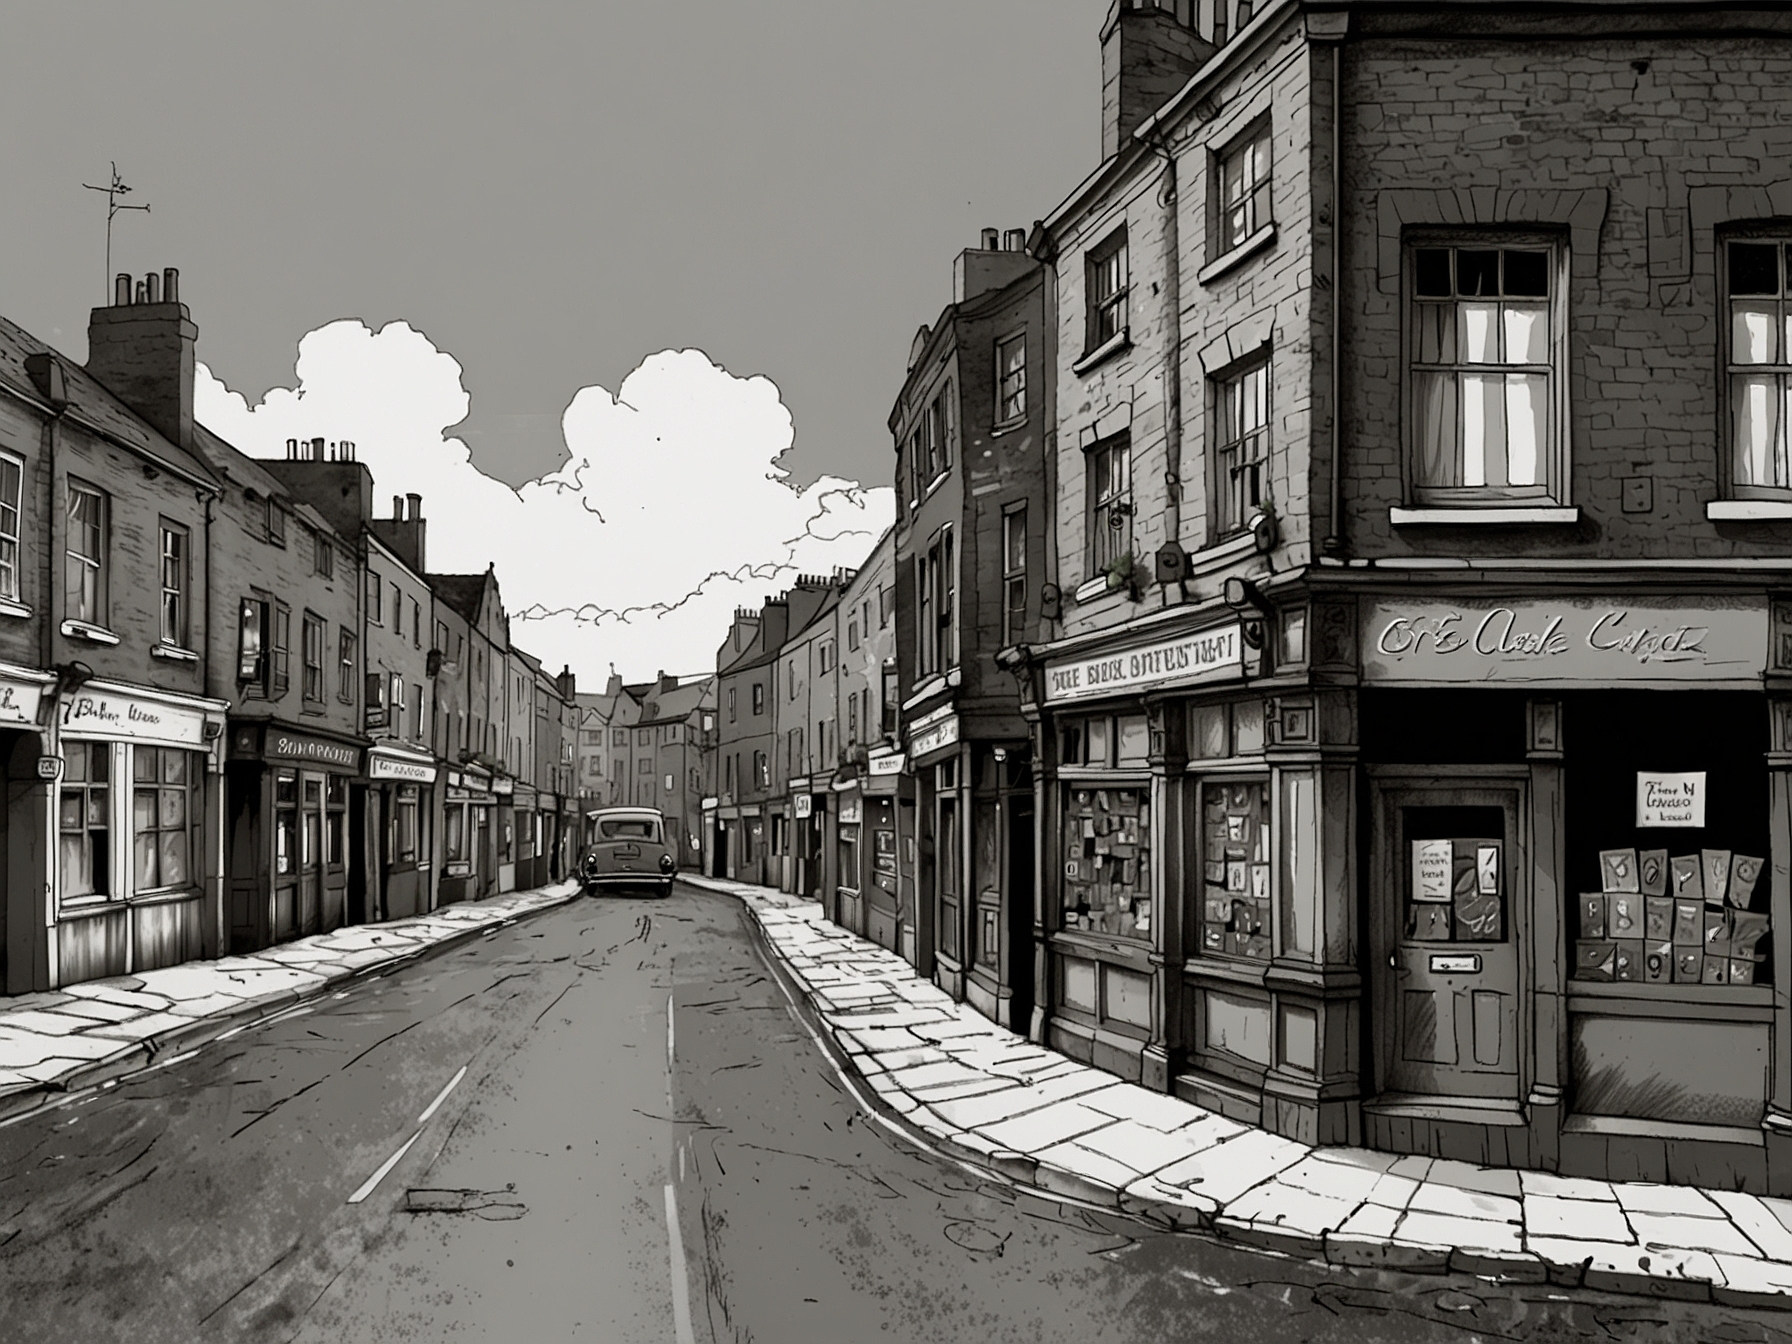 A deserted high street with shuttered pubs and shops, illustrating the broader economic shifts and cultural losses facing communities in England and Wales.